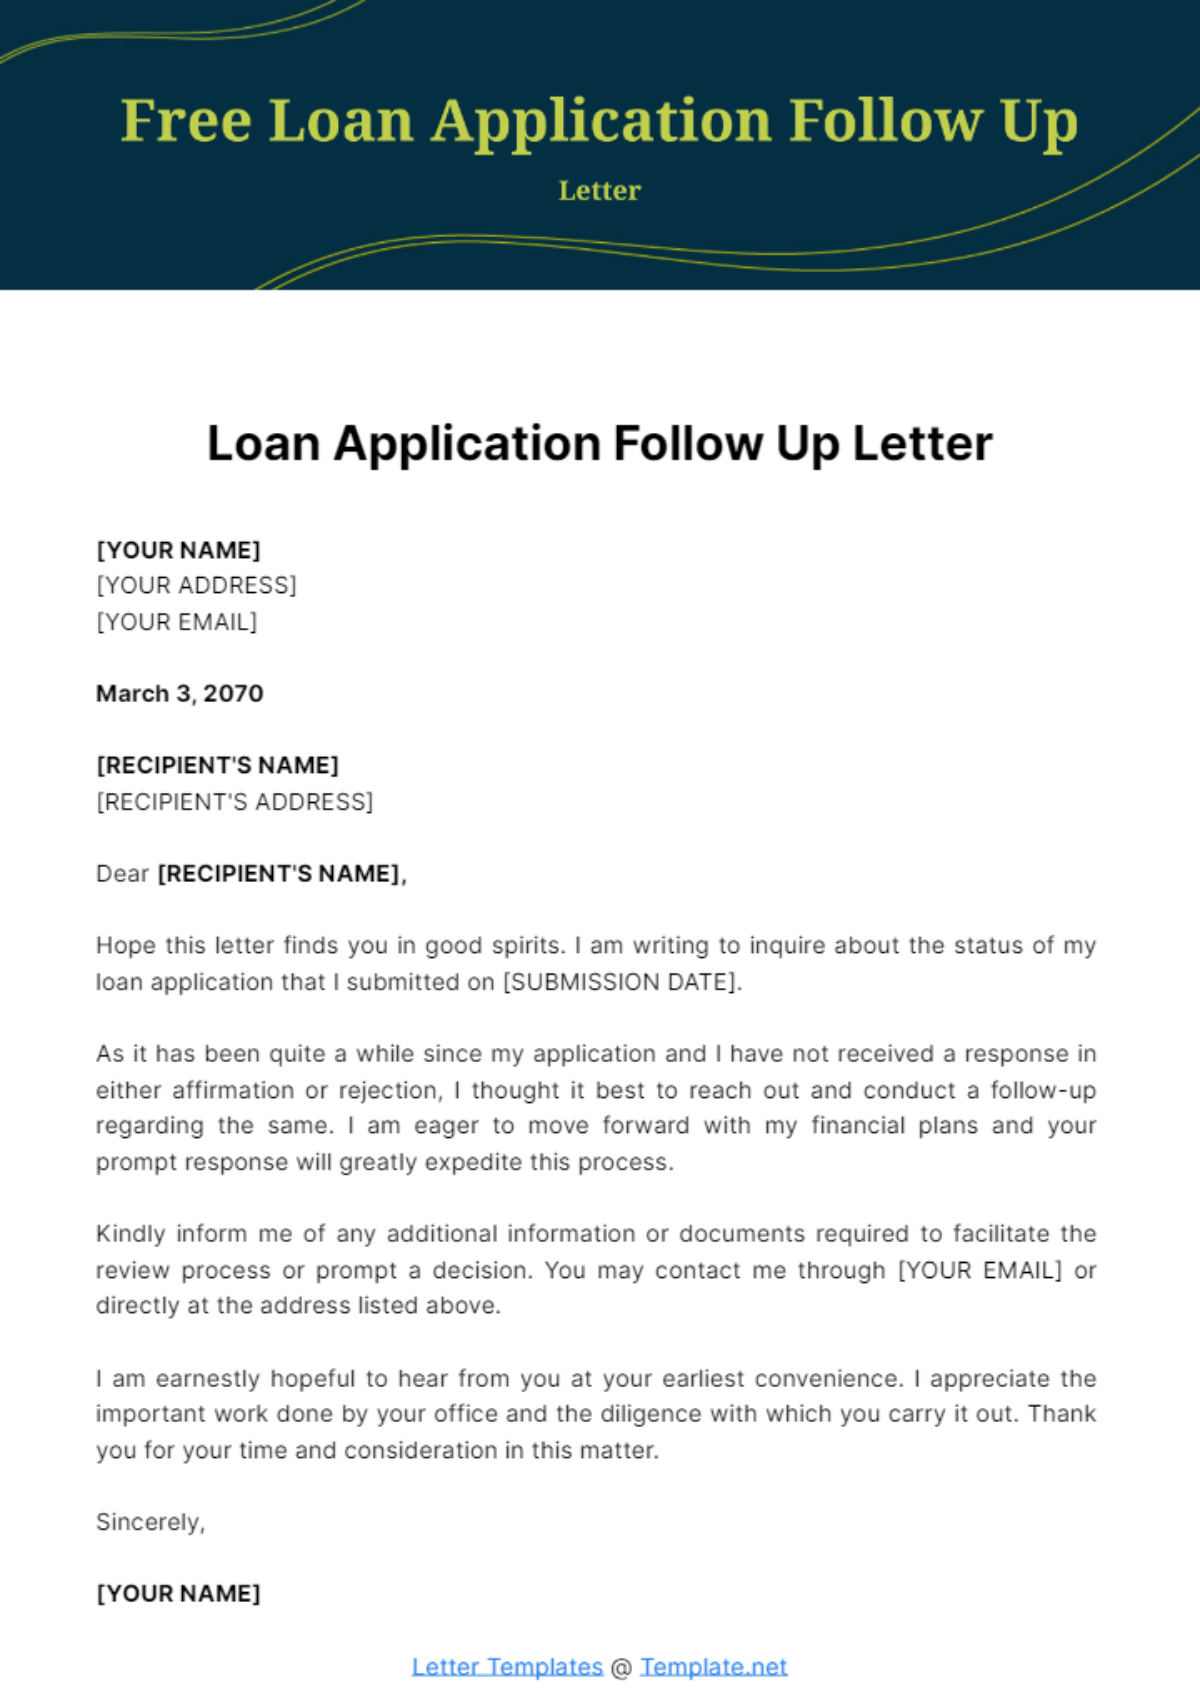 Free Loan Application Follow Up Letter Template